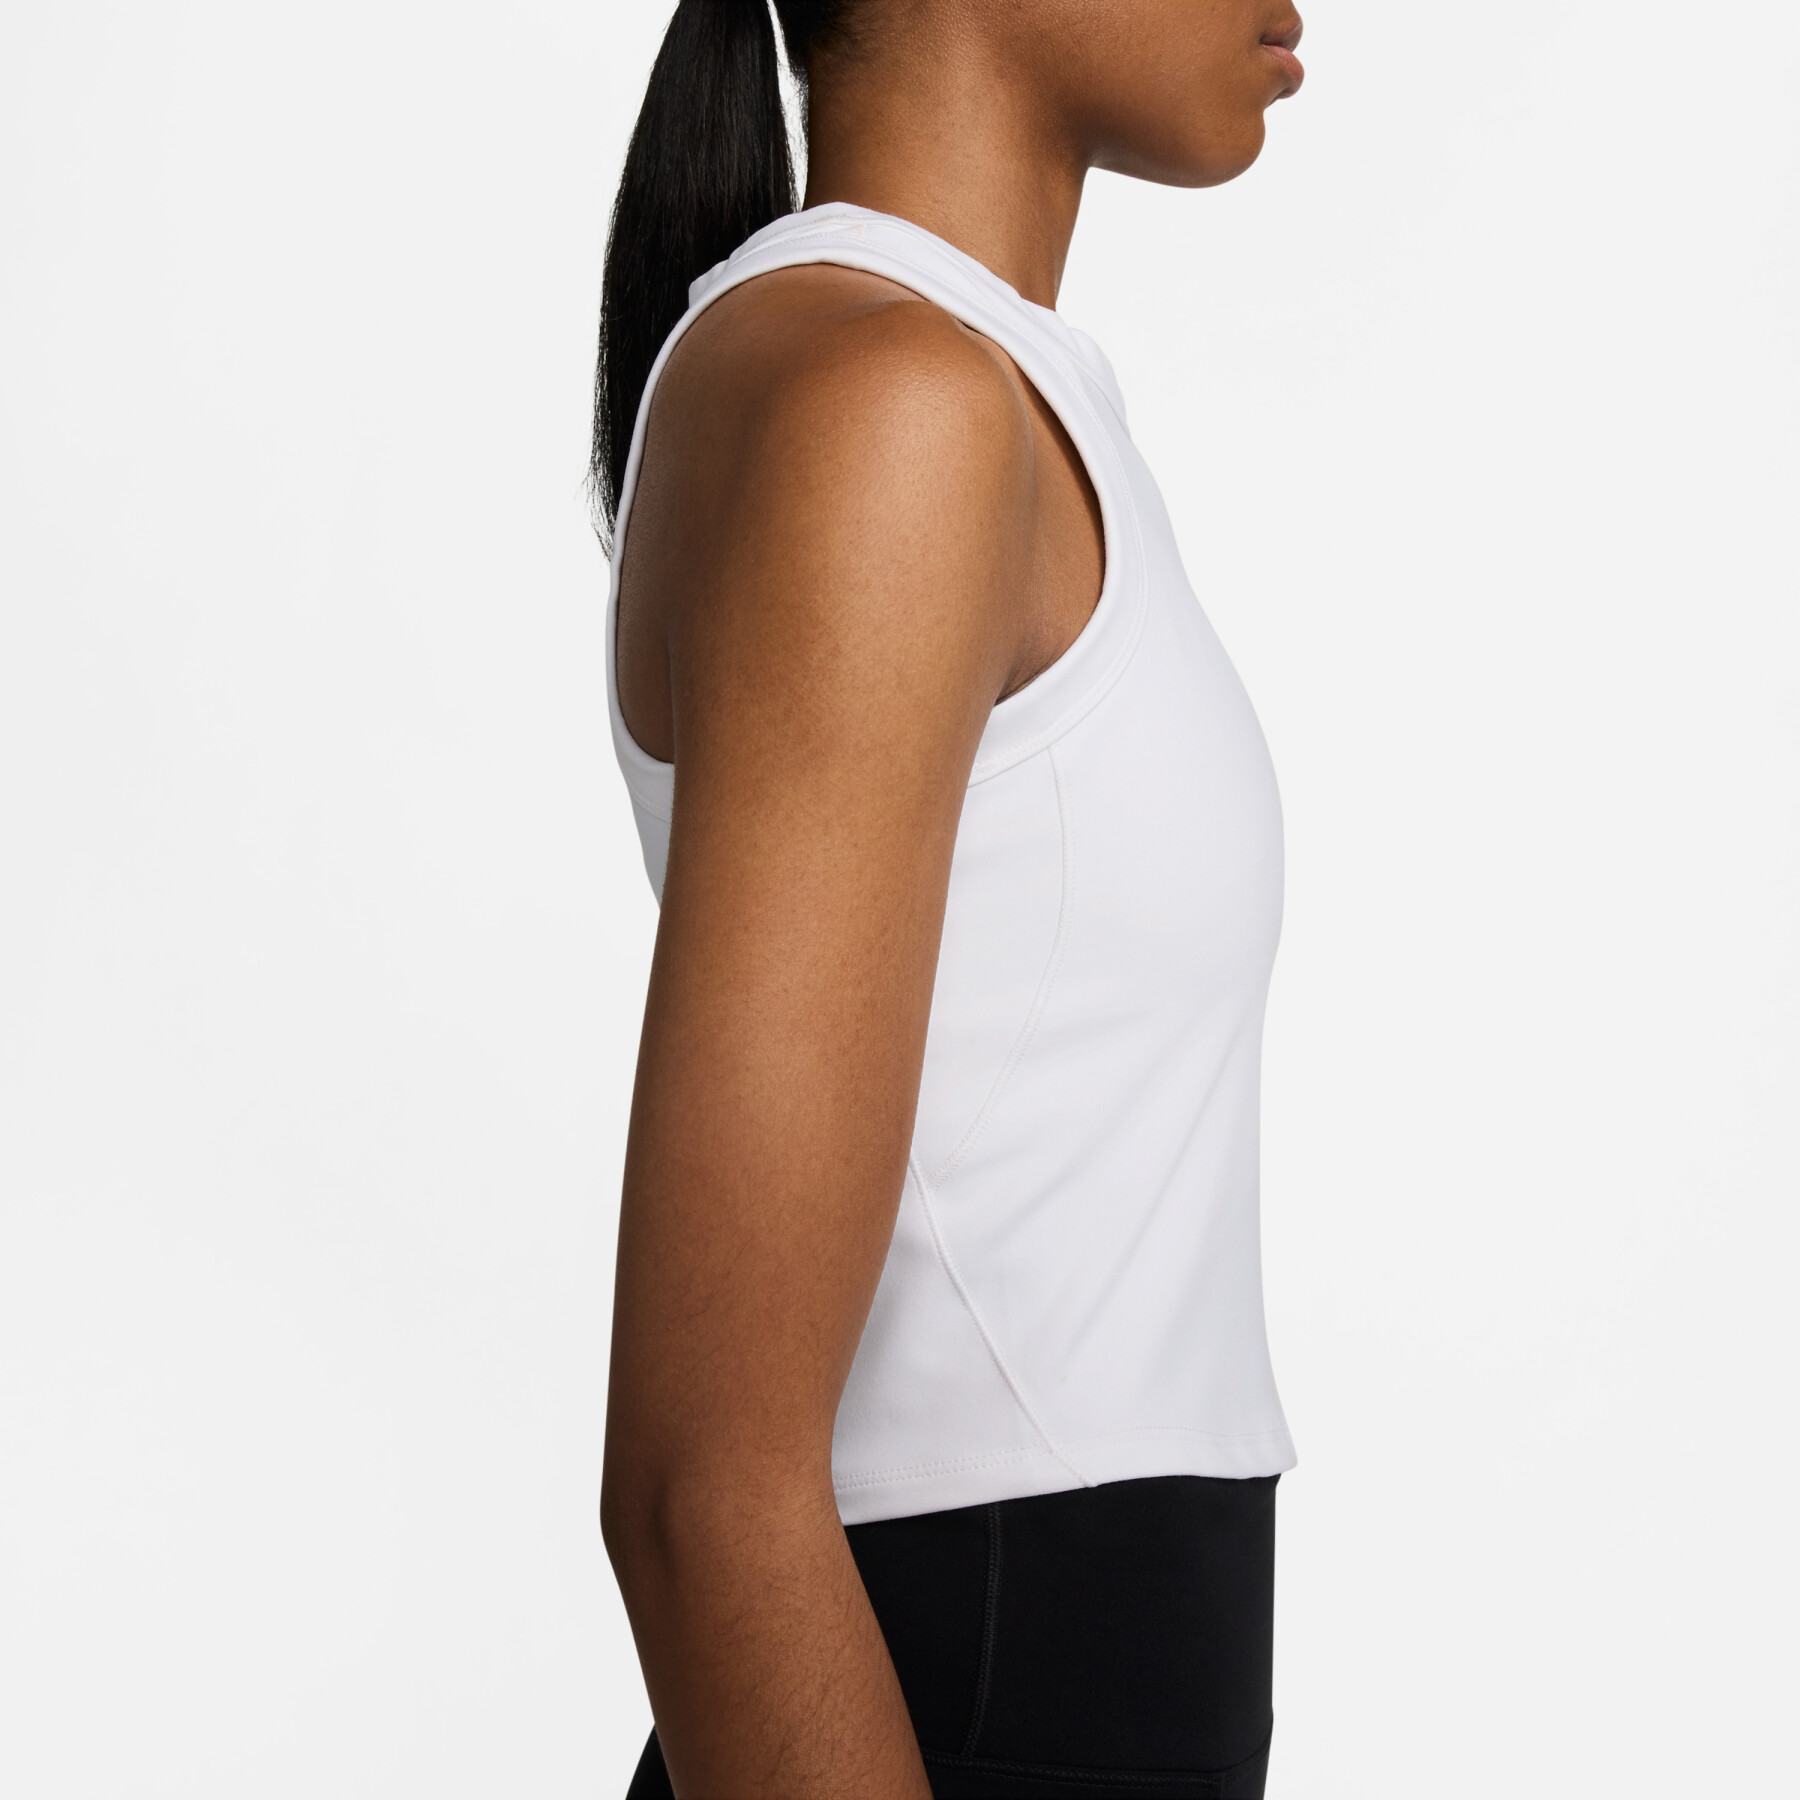 Damen-Top Nike One Fitted